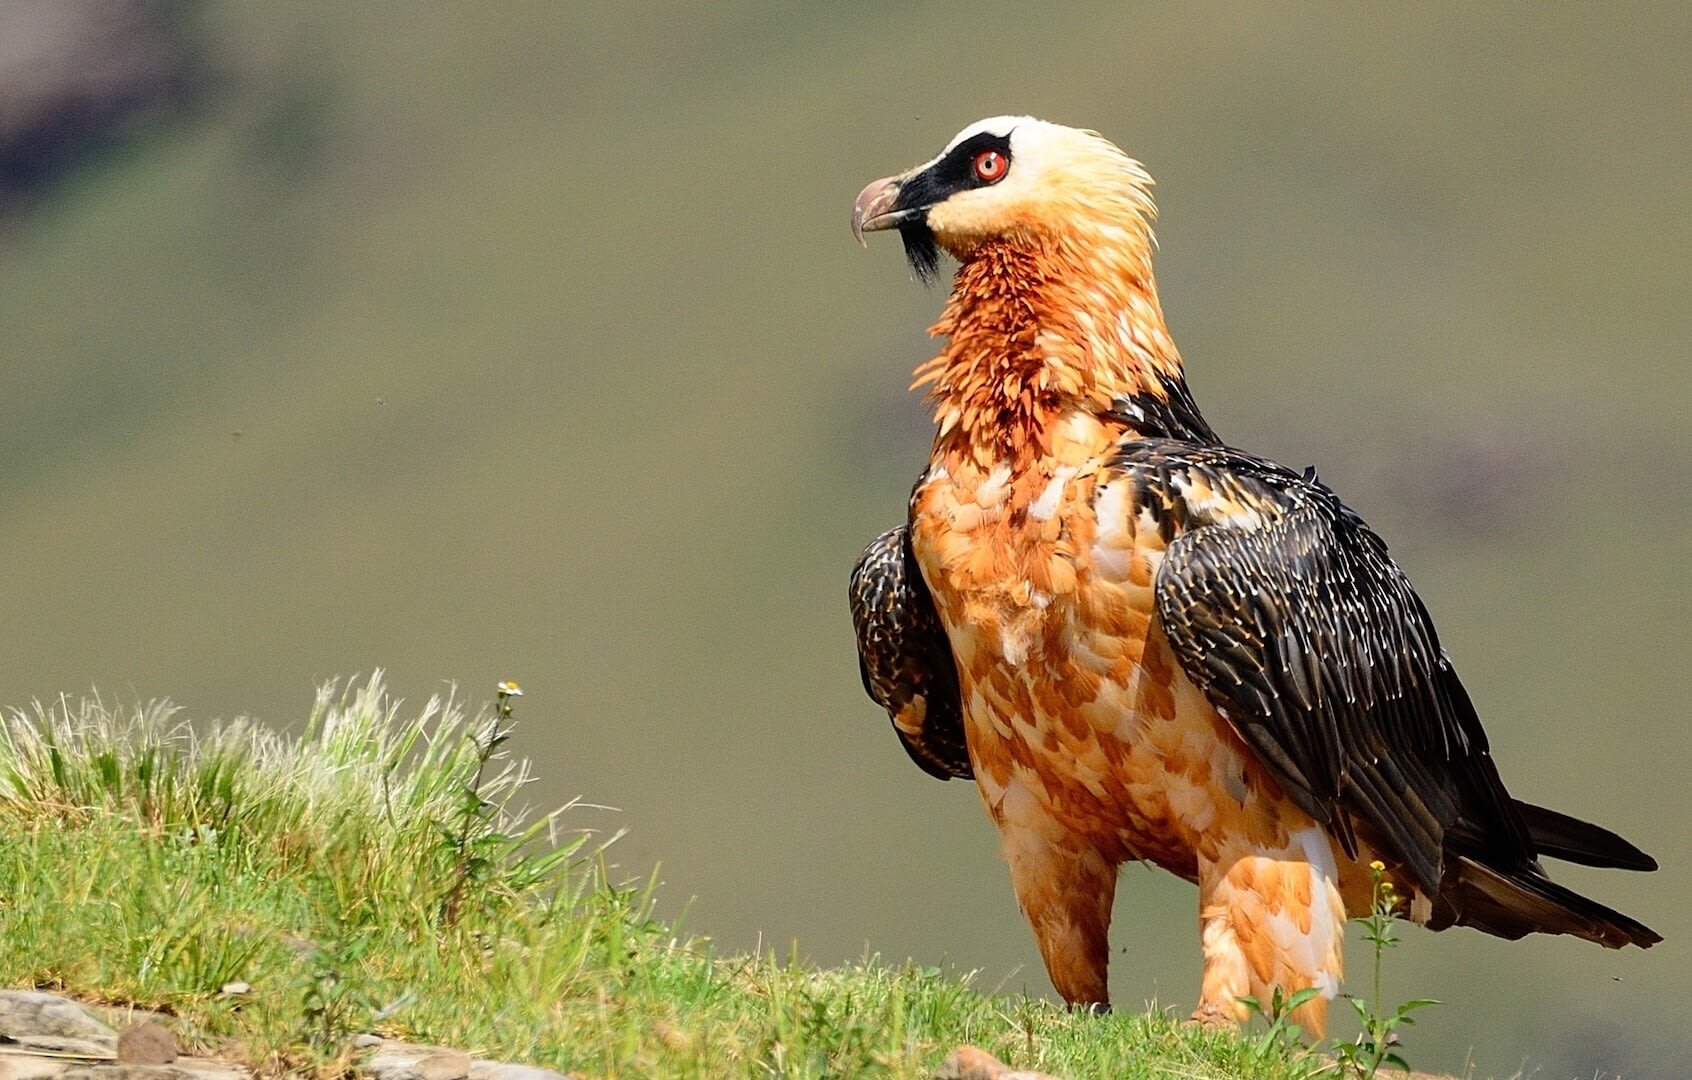 How does a bearded vulture extract bone marrow from its prey?